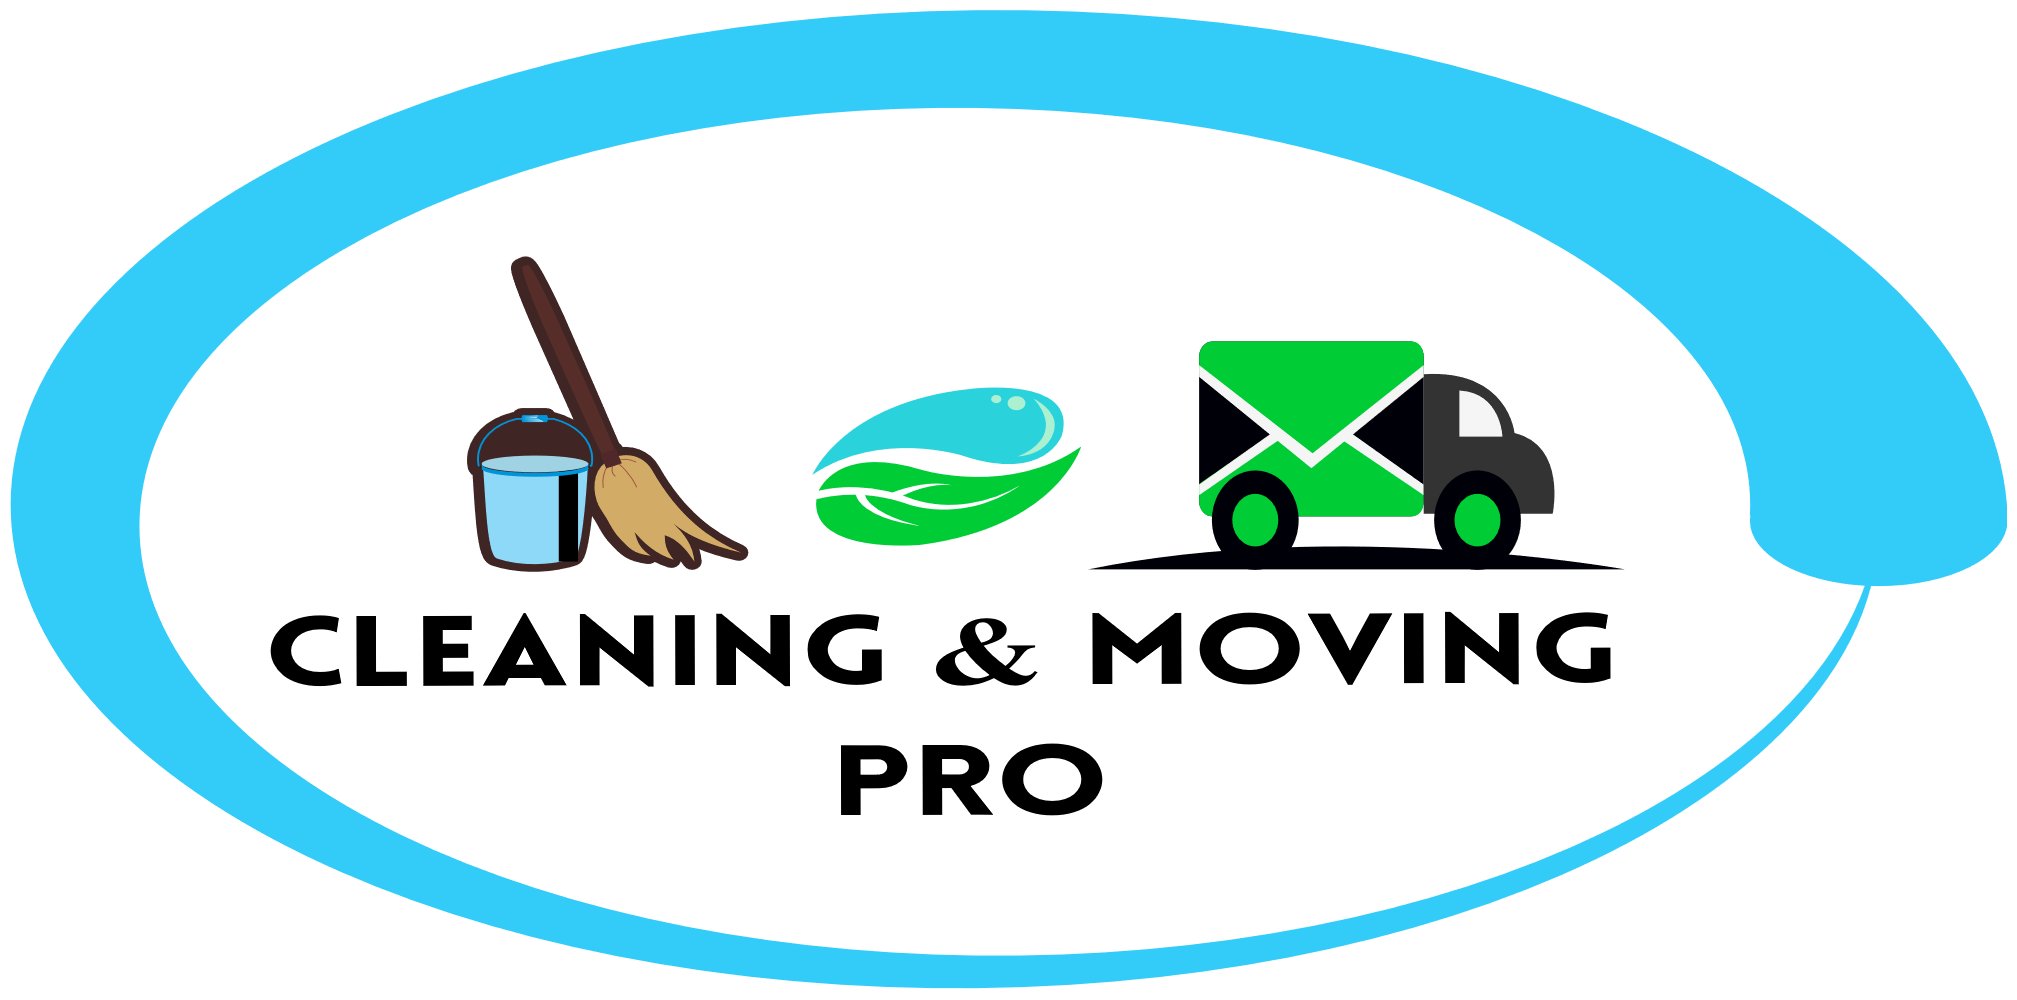 Service-CLEANING AND MOVING PRO